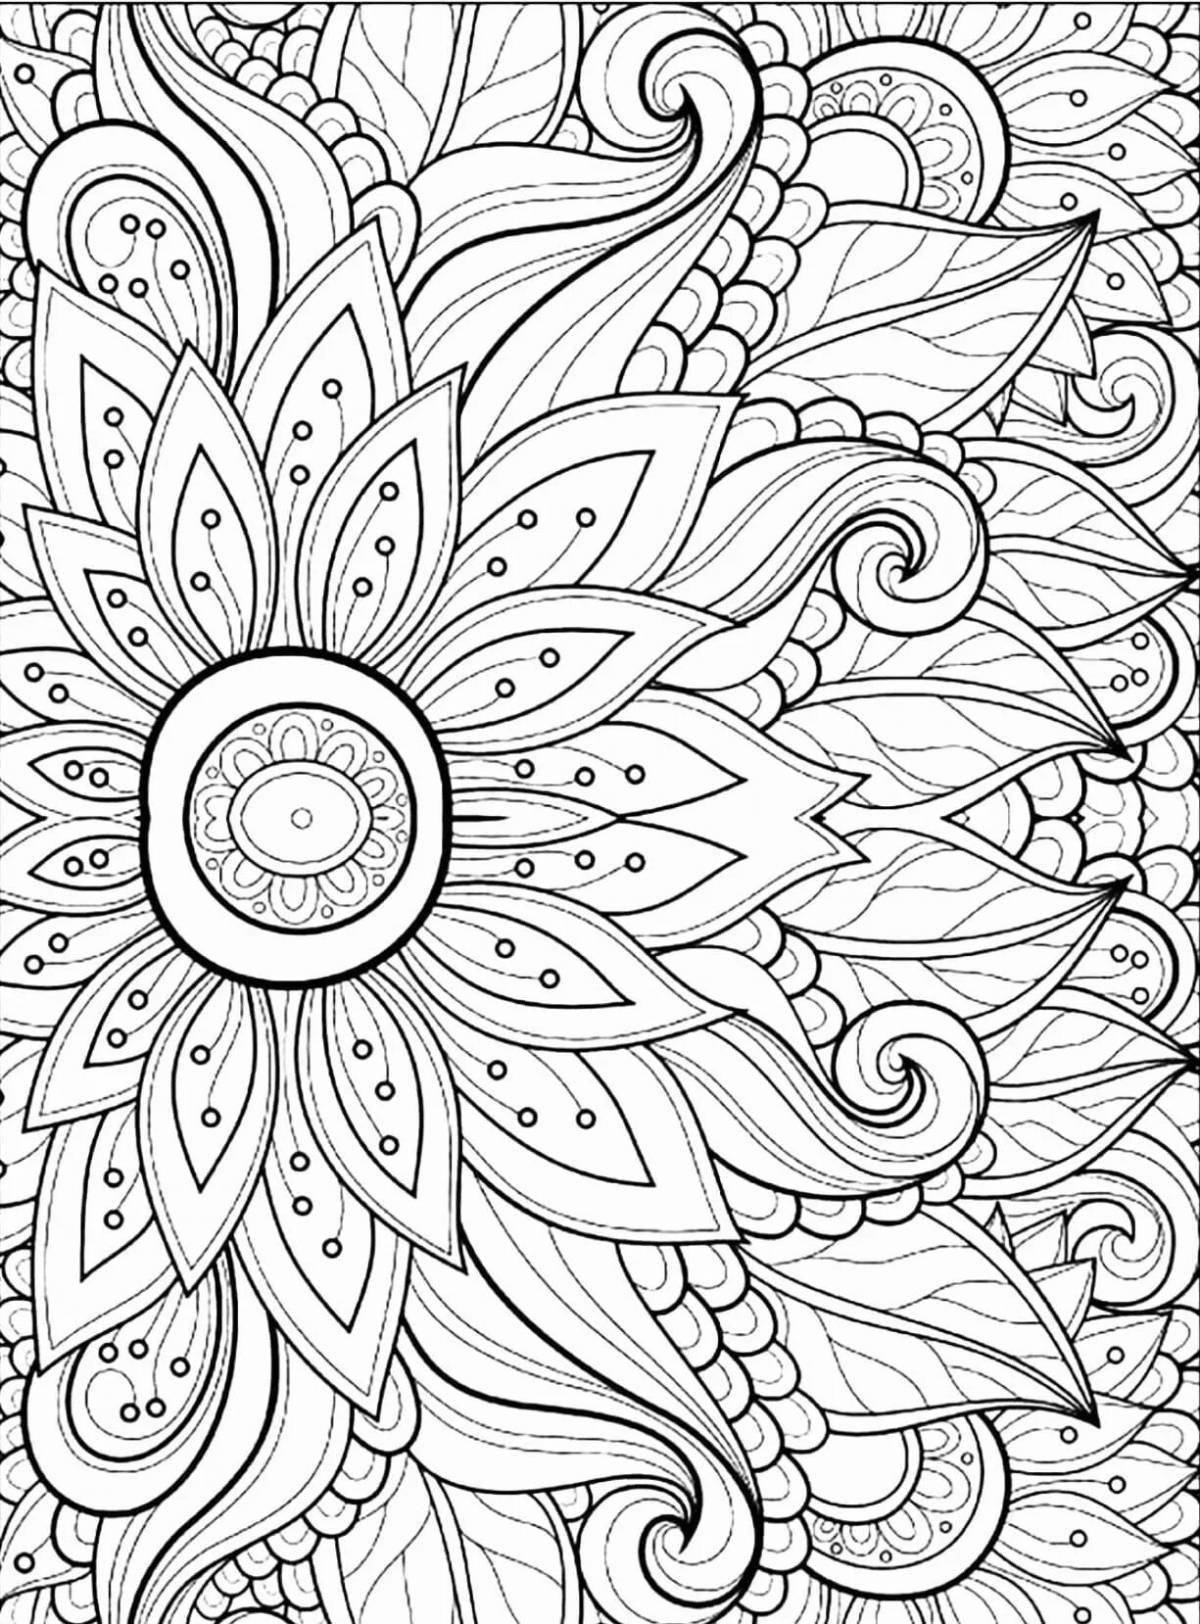 Blissful coloring drawings antistress